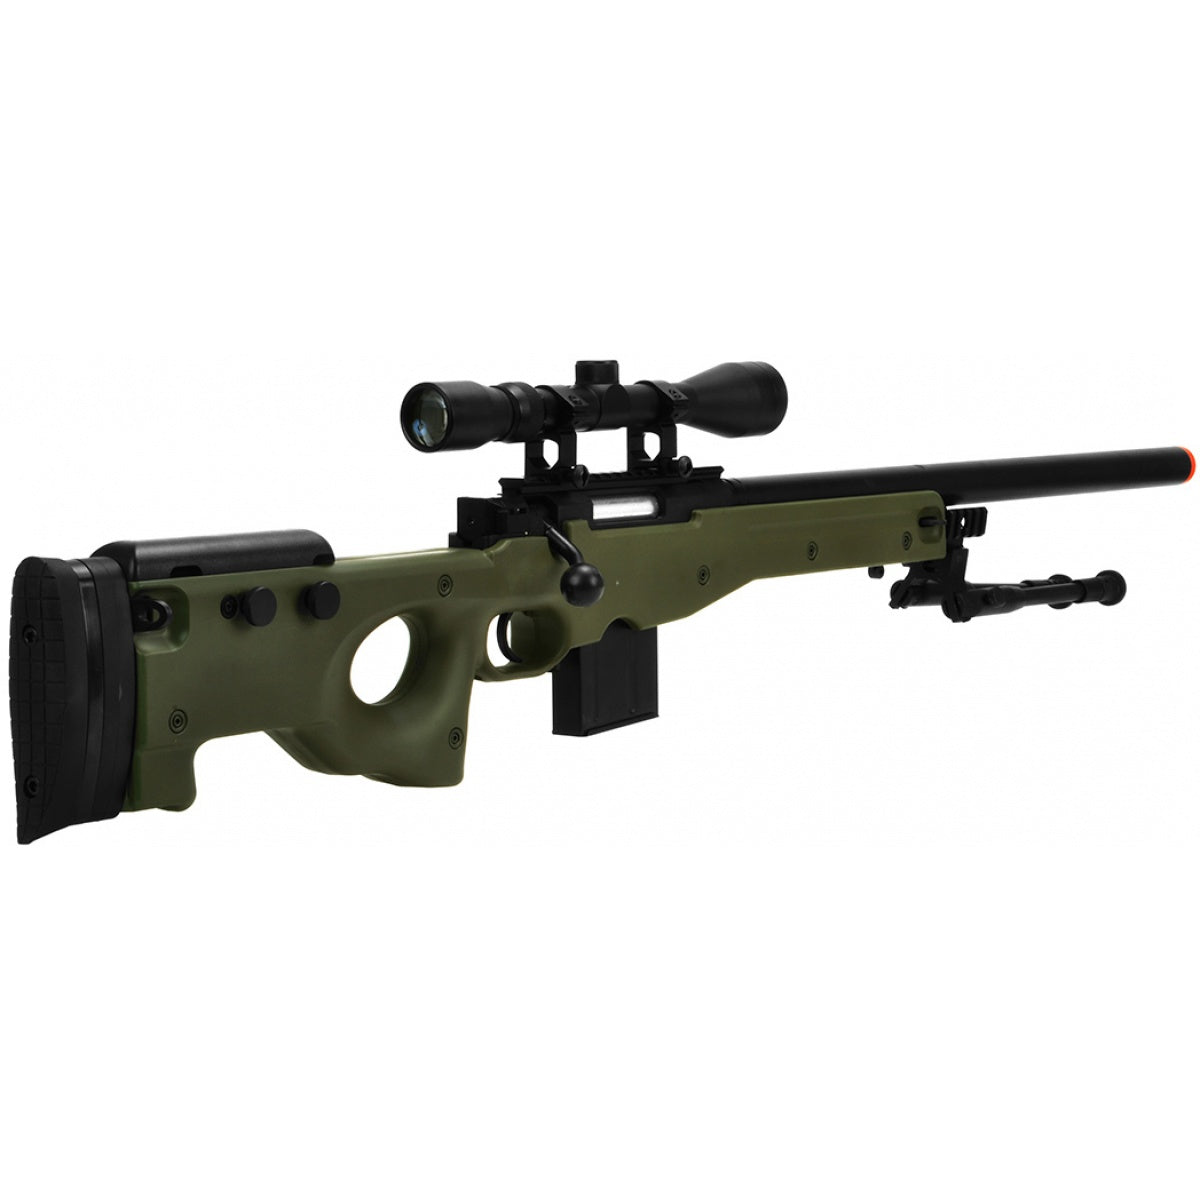 WELLFIRE AIRSOFT L96 AWP BOLT ACTION RIFLE W/ BIPOD AND SCOPE - ssairsoft